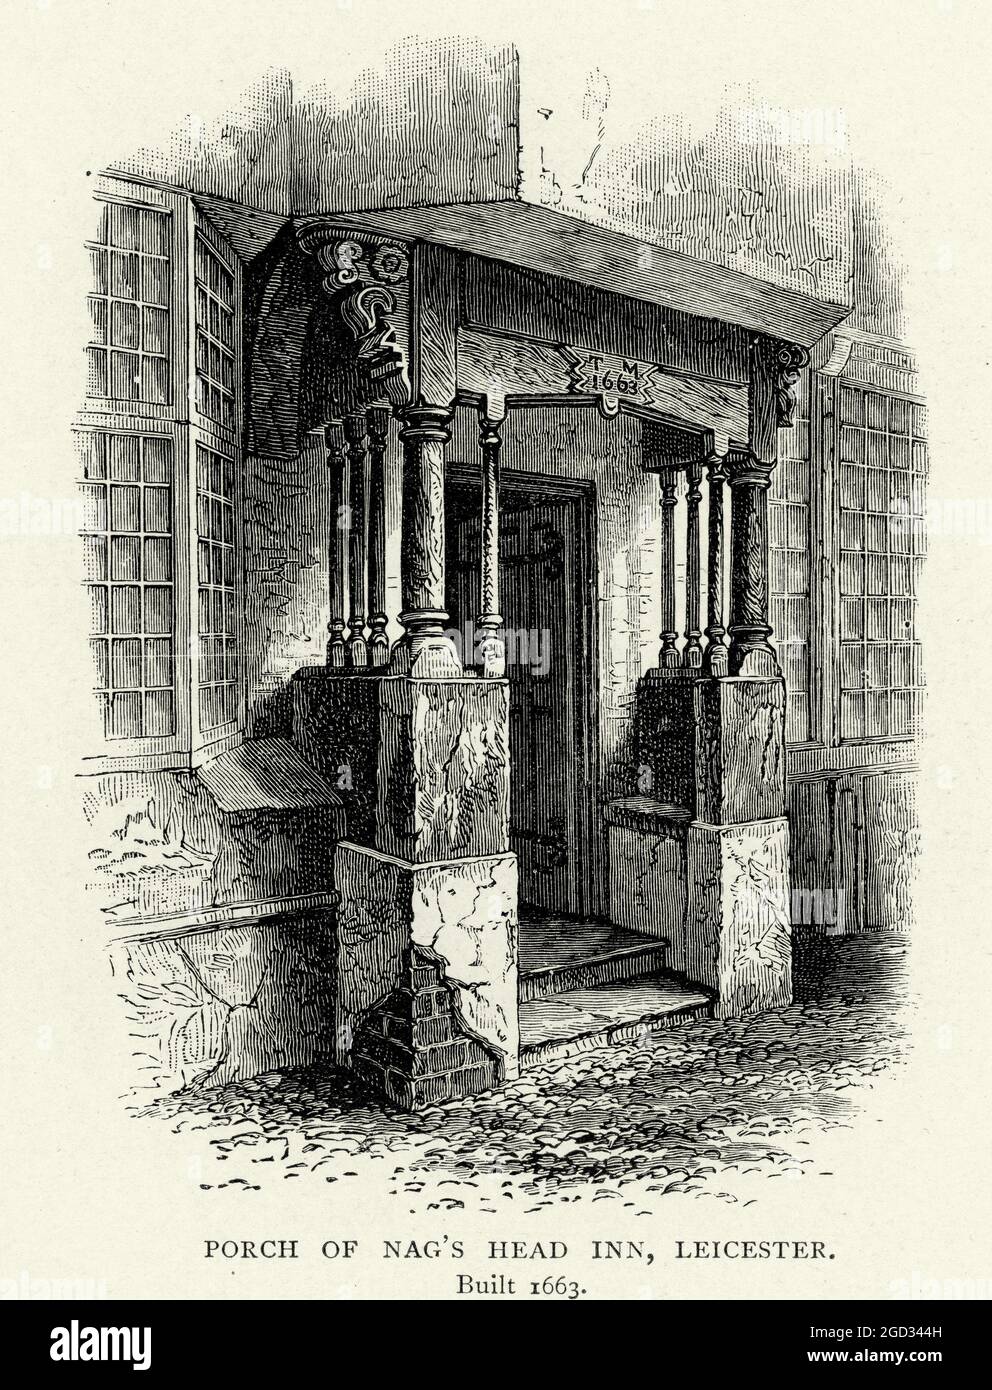 Porch of Nag's Head Inn, Leicester, built 1663, 17th Century English Architecture Stock Photo